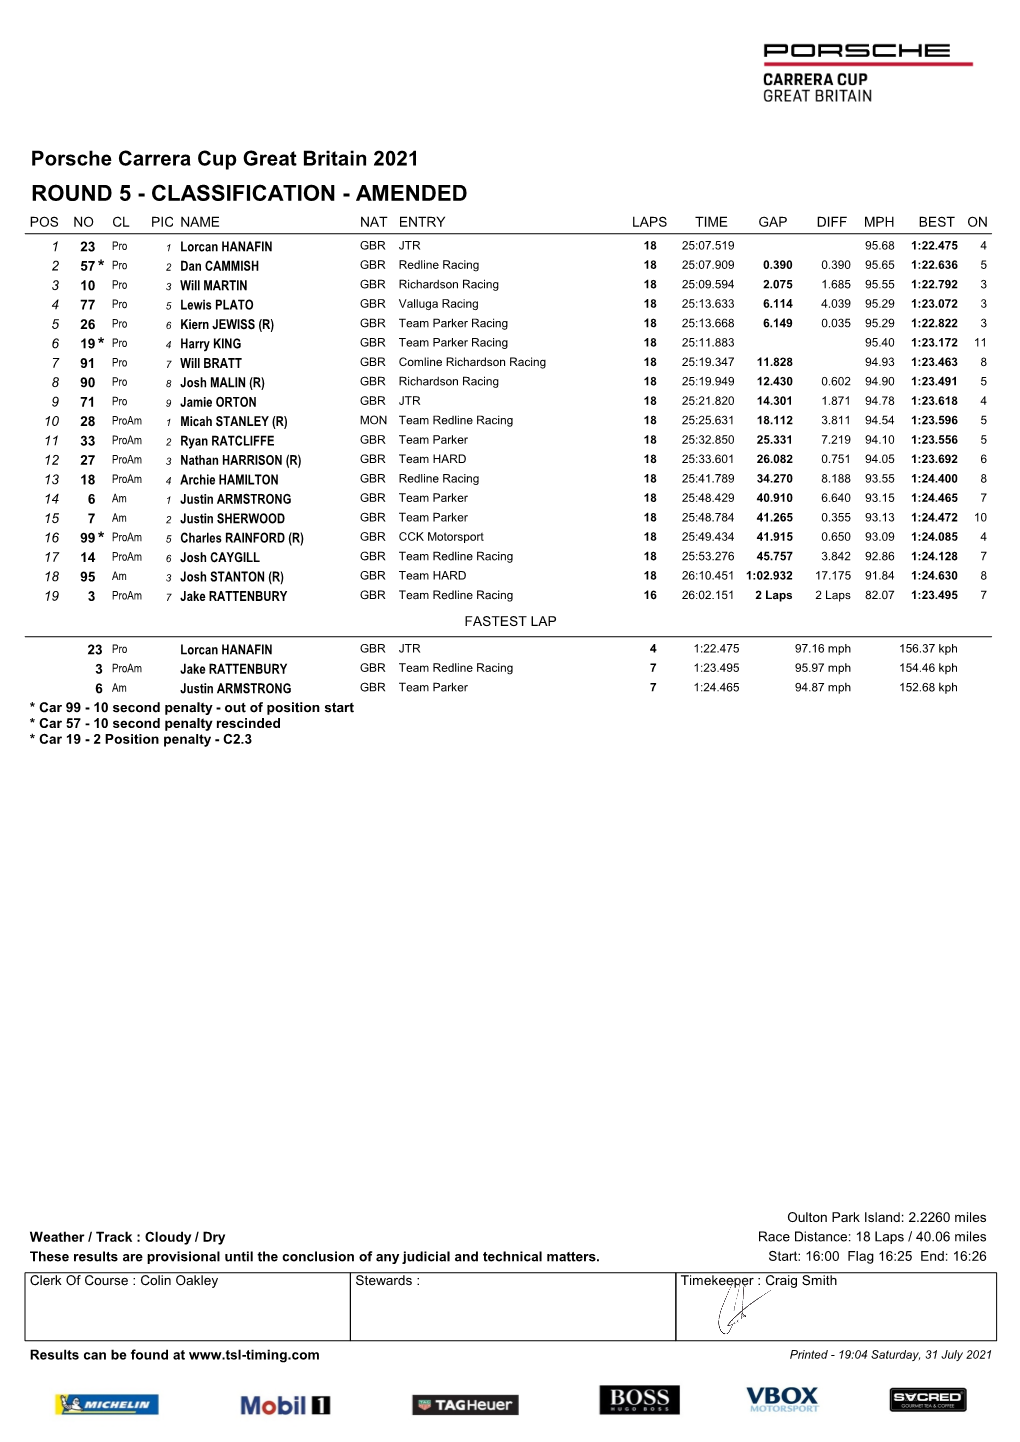 Porsche Carrera Cup Great Britain 2021 ROUND 5 - CLASSIFICATION - AMENDED POS NO CL PIC NAME NAT ENTRY LAPS TIME GAP DIFF MPH BEST ON